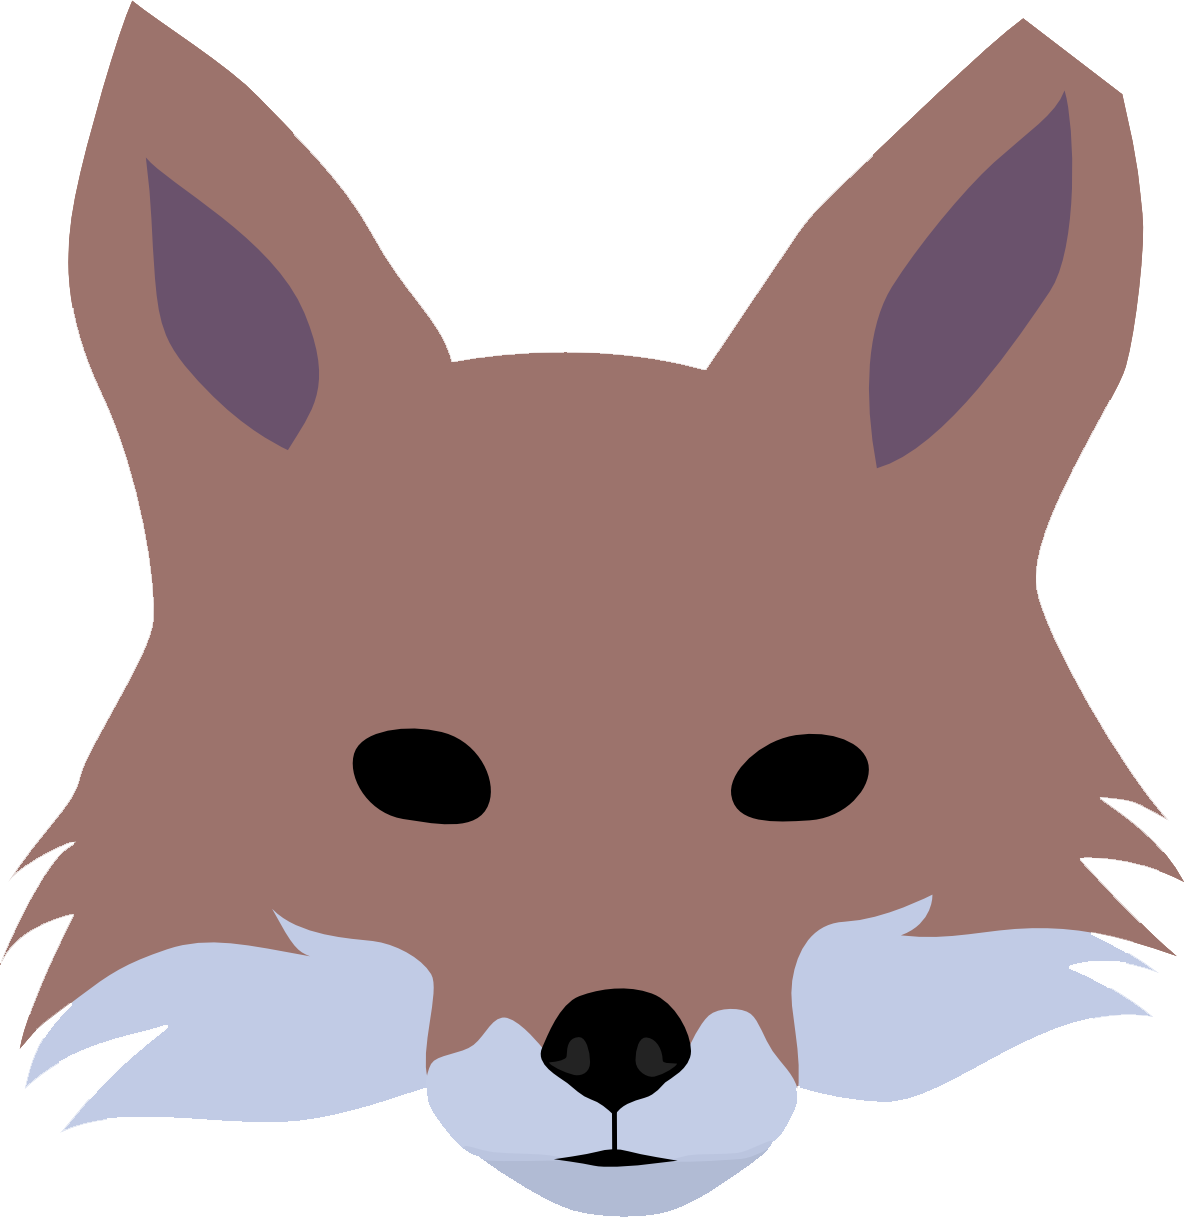 an illustration of a ghostly fox with missing eyes, it's very spooky